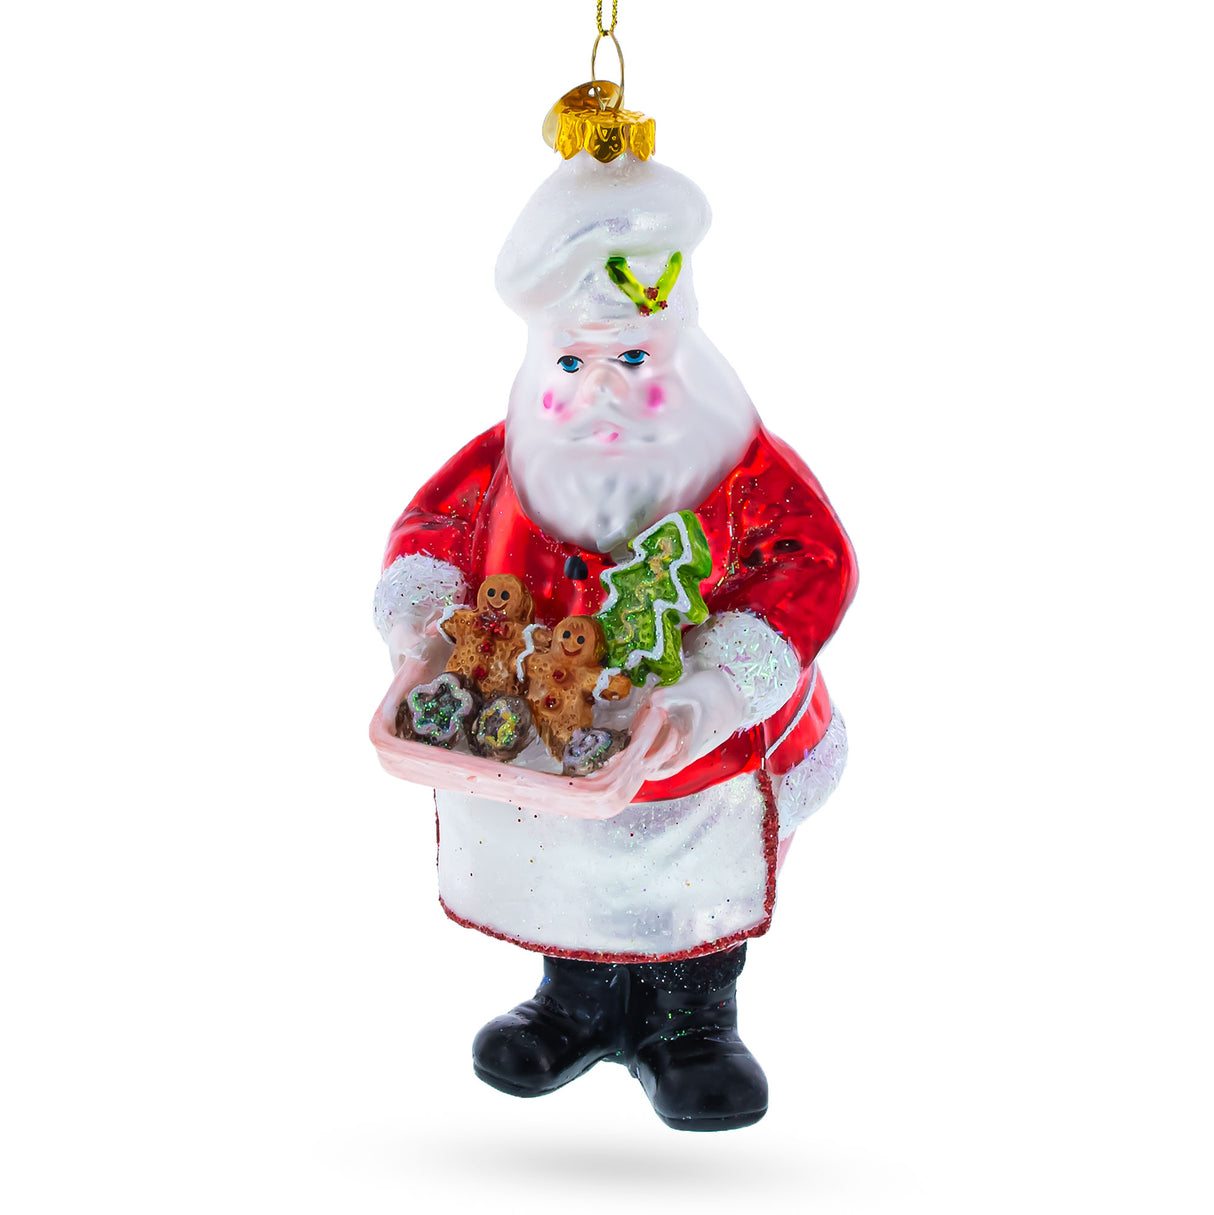 Glass Santa Baking Gingerbread Cookies Blown Glass Christmas Ornament in Red color